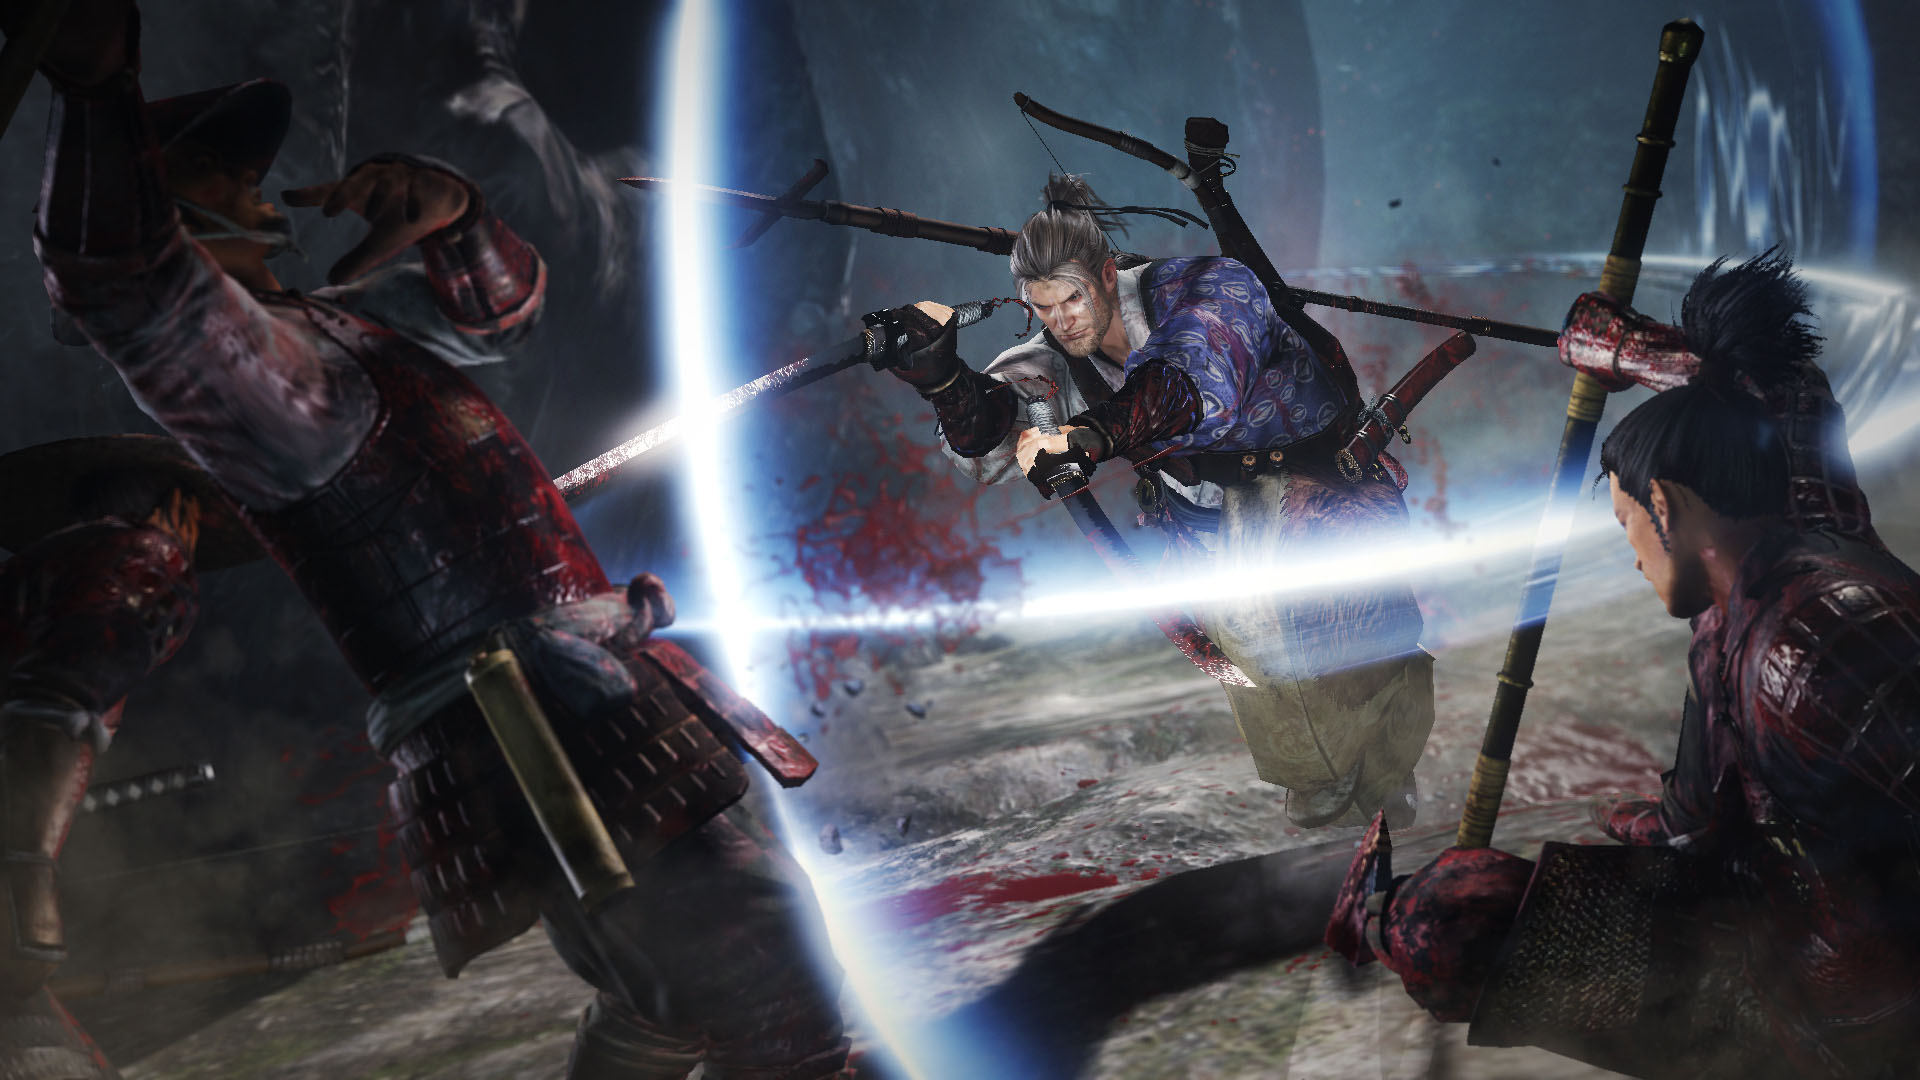 Nioh DLC Brings Harder Missions, PVP, and More